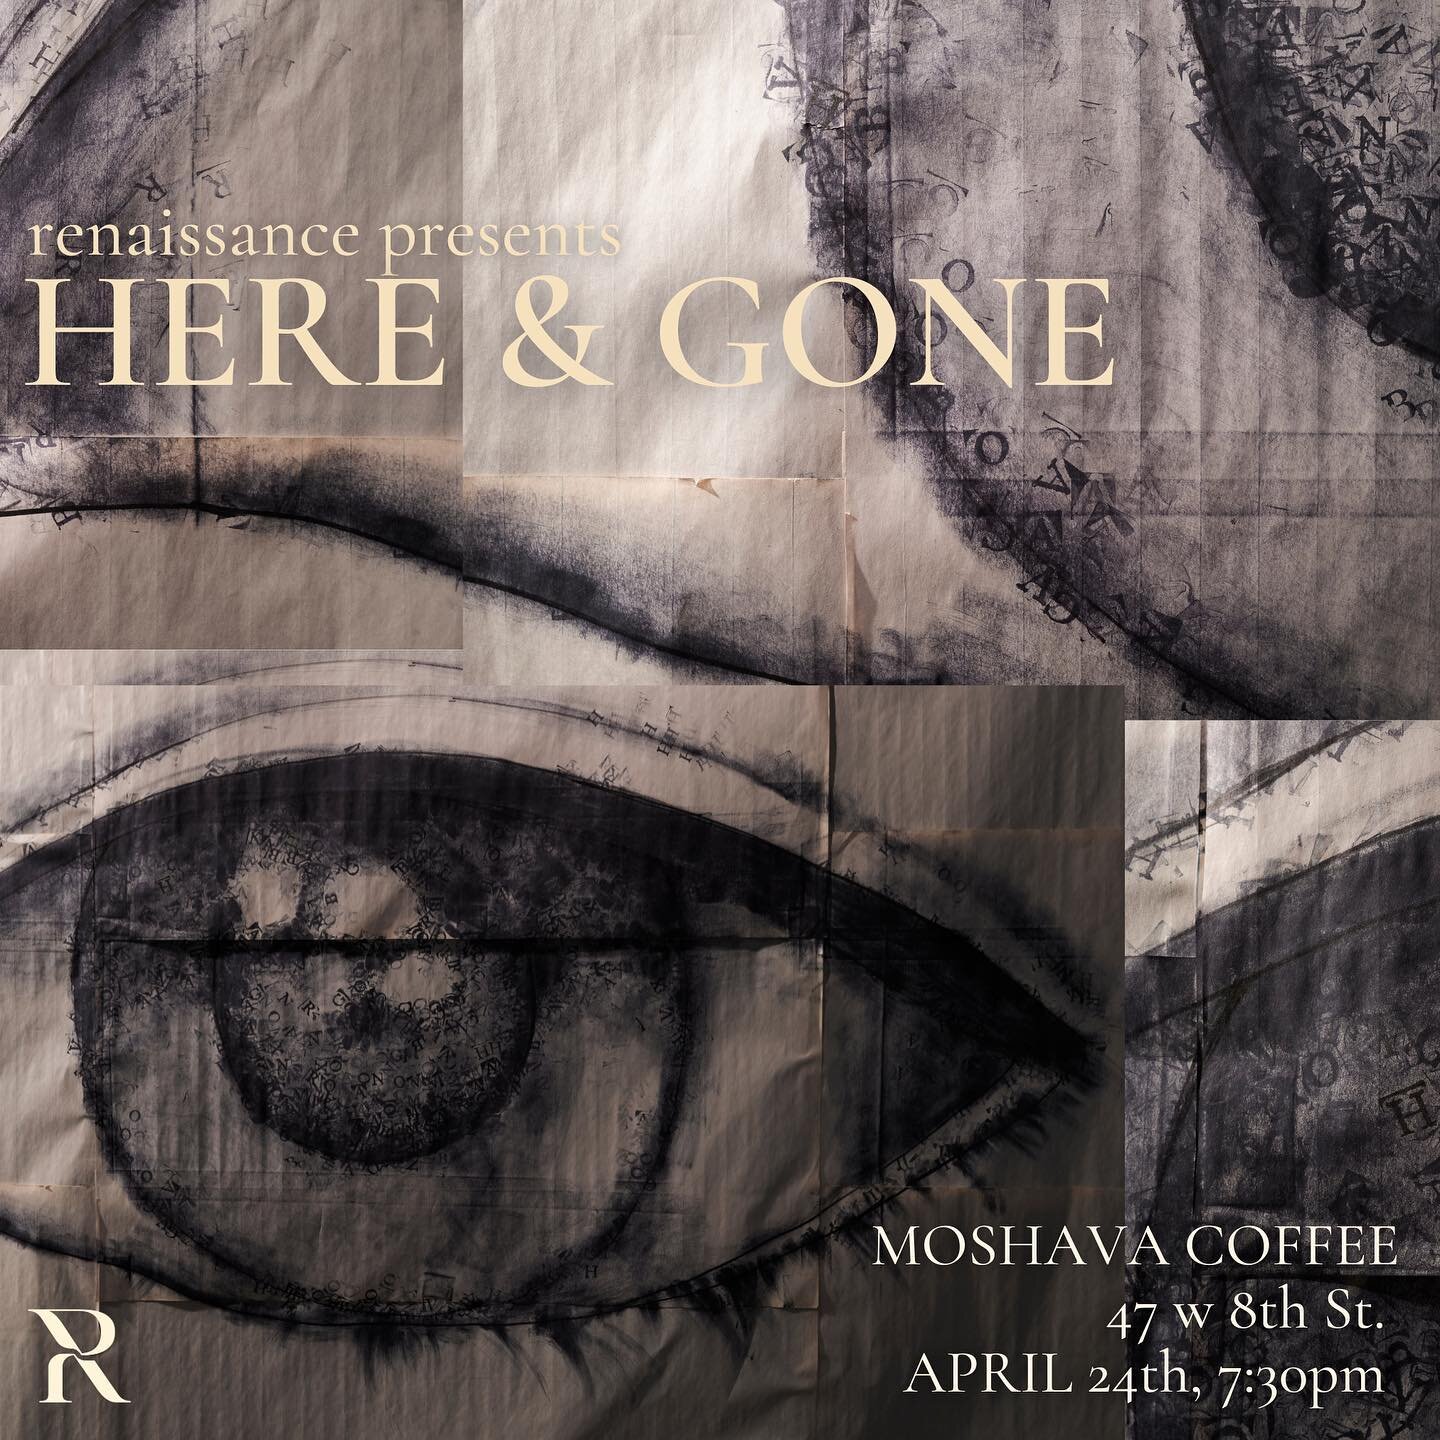 Join us on April 24th at 7:30pm for Renaissance Presents: Here &amp; Gone. Come explore the multi-medium immersive experience we have curated with members of our community. From live performance to film to an exploration of the directing process, as 